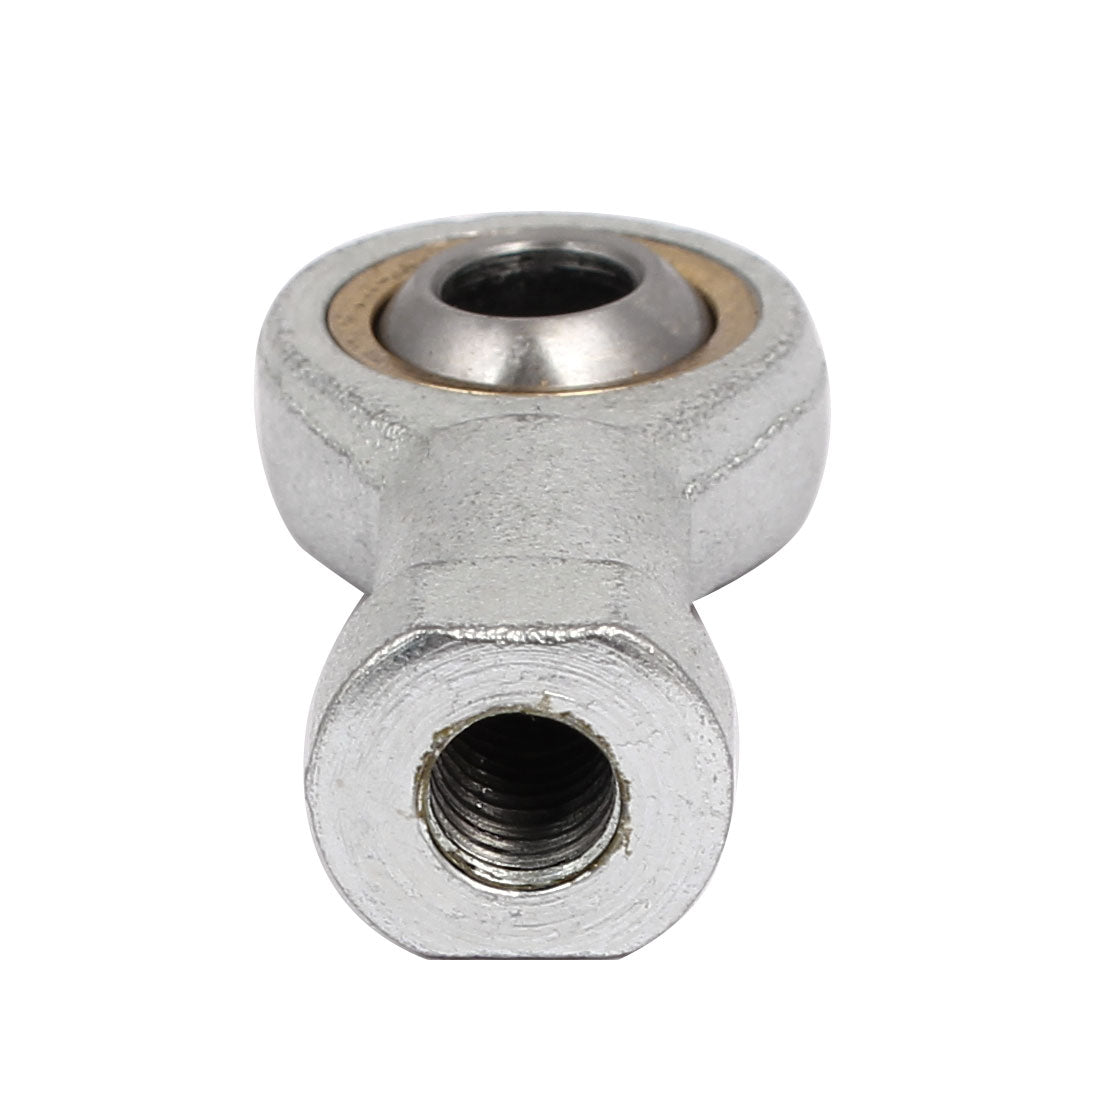 uxcell Uxcell SI8T/K Metal Female Thread Self-lubricating Rod End Bearings 8mm Hole Dia 2pcs